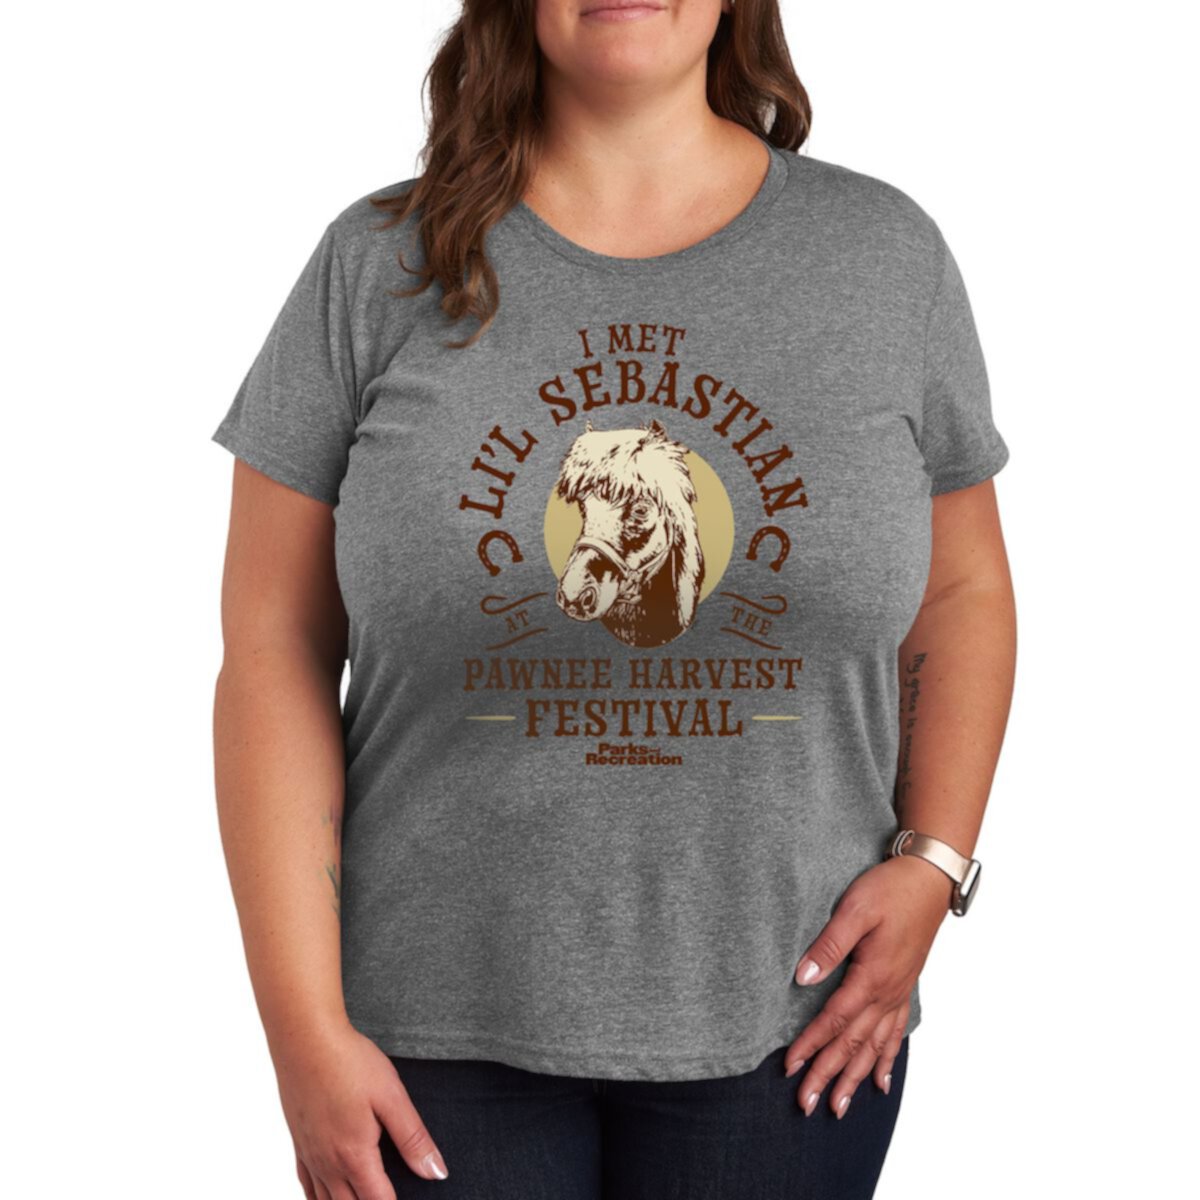 Plus Parks and Recreation Lil Sebastian Graphic Tee Licensed Character